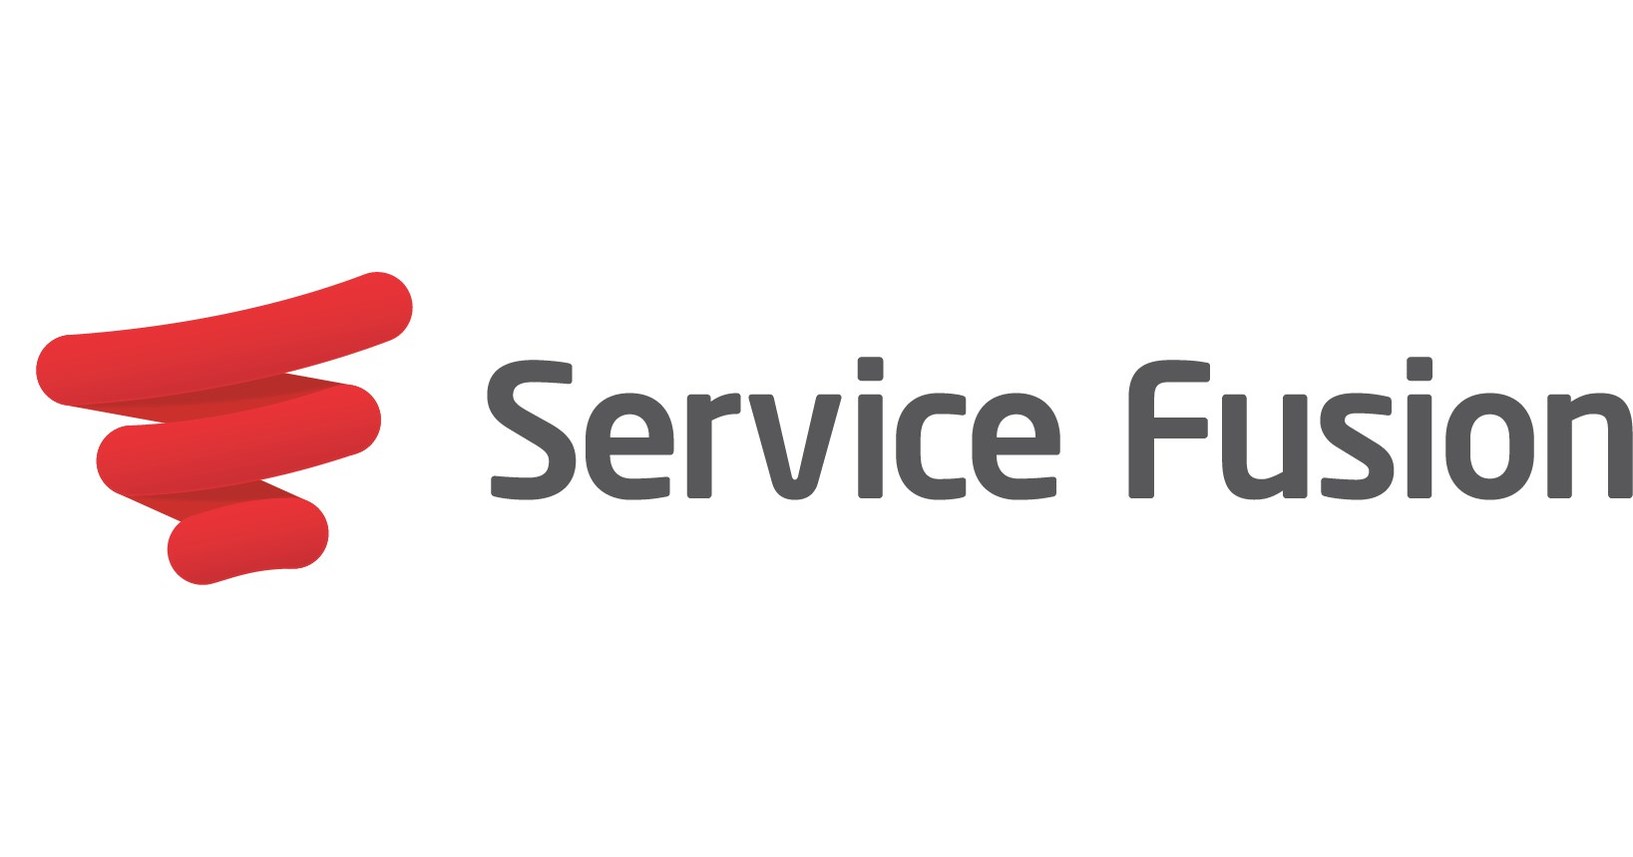 Service Fusion Expands Partnership with HVAC Leaders Trane and American Standard via Integration Agreement